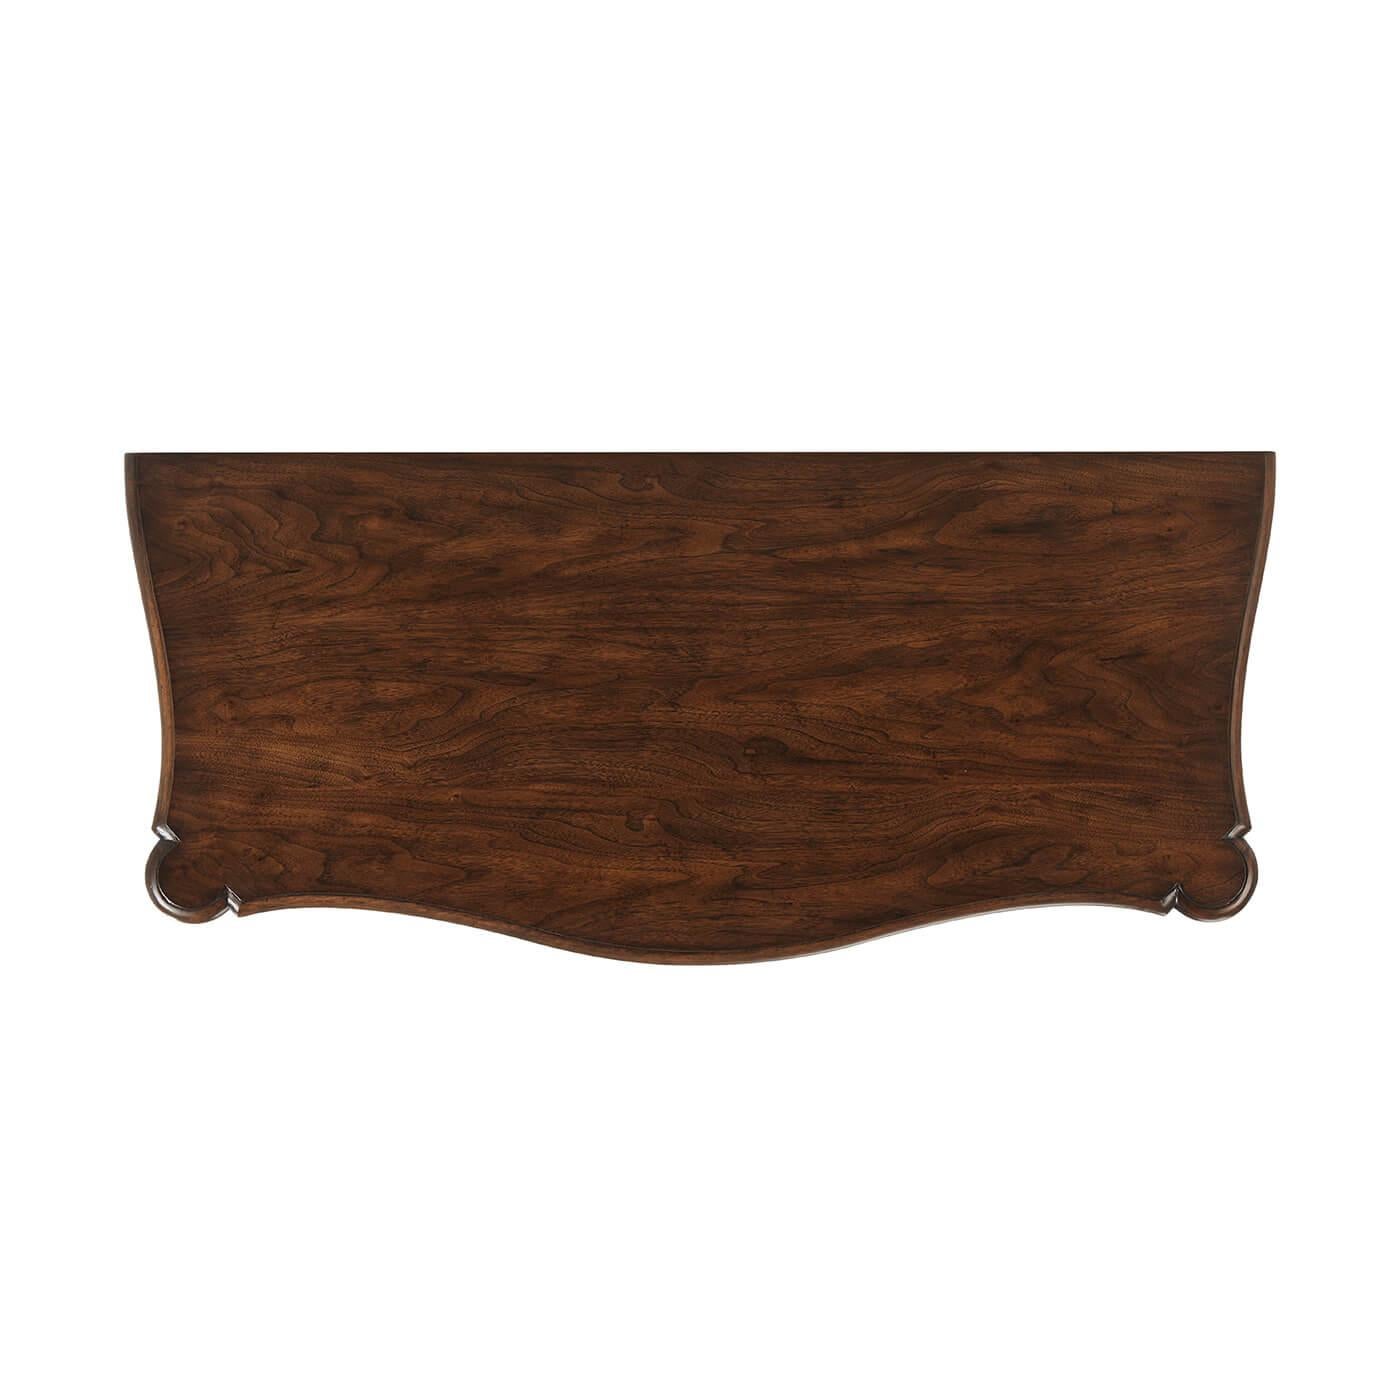 Georgian style serpentine four-drawer chest with a warm walnut finish, a molded serpentine edge top, with four serpentine drawers with drop ring handles, a shaped apron on bracket feet. Variations are expected in the hand-rubbed and distressed